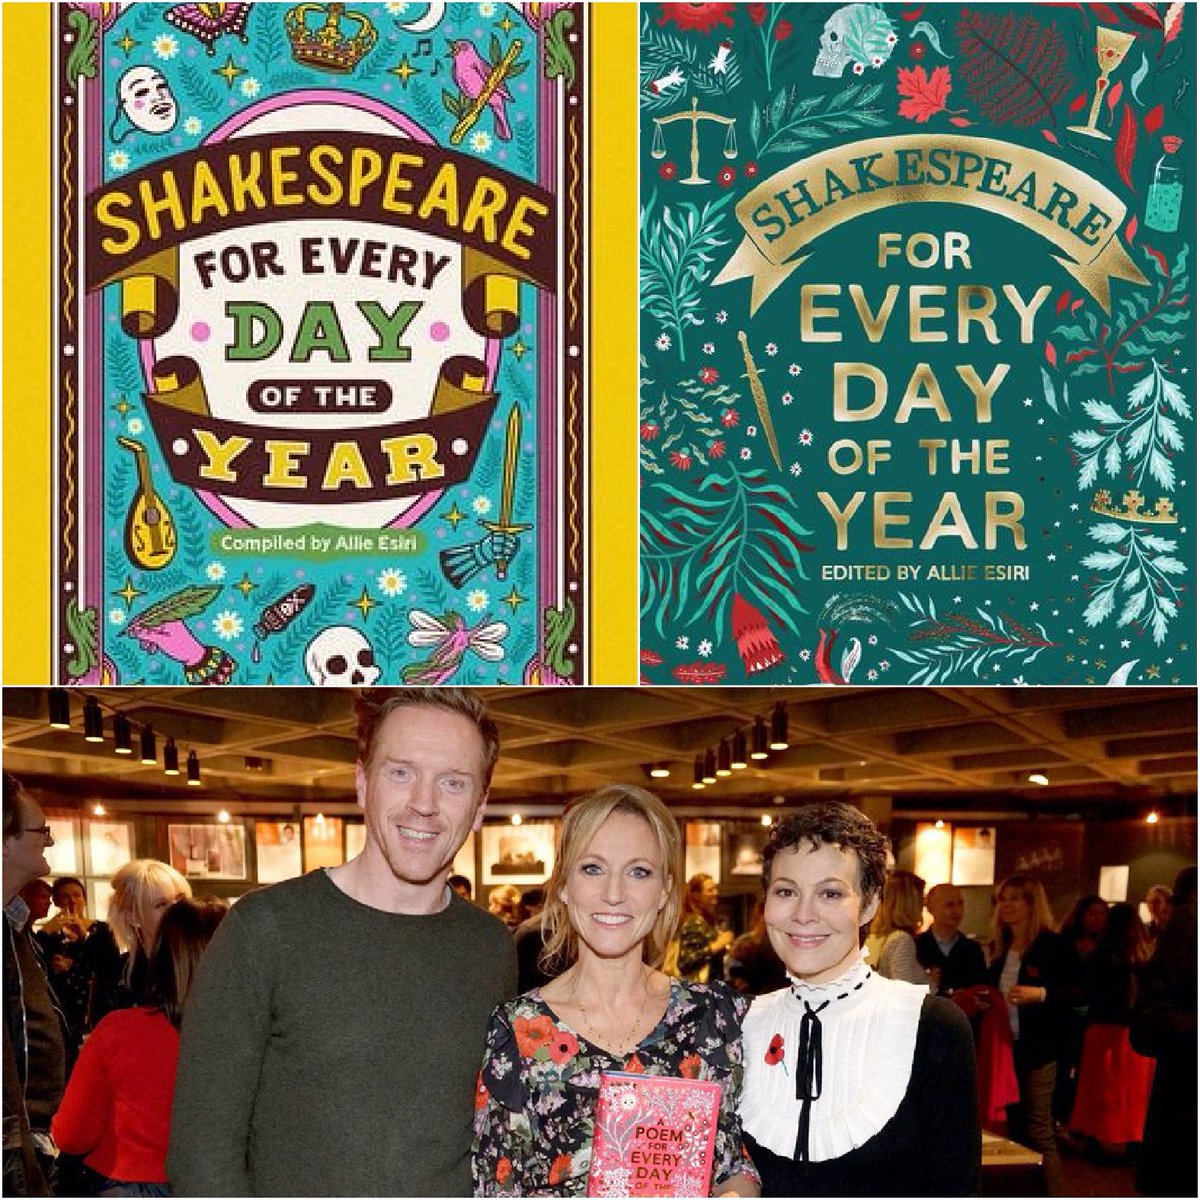 Happy Shakespeare Day! 'Shakespeare For Every Day of The Year' edited by the wonderful #AllieEsiri and narrated by brilliant stars including #DamianLewis and #HelenMcCrory is now available on Spotify in the UK and the US! Details here damian-lewis.com/?p=53545 #Shakespeare #Poetry